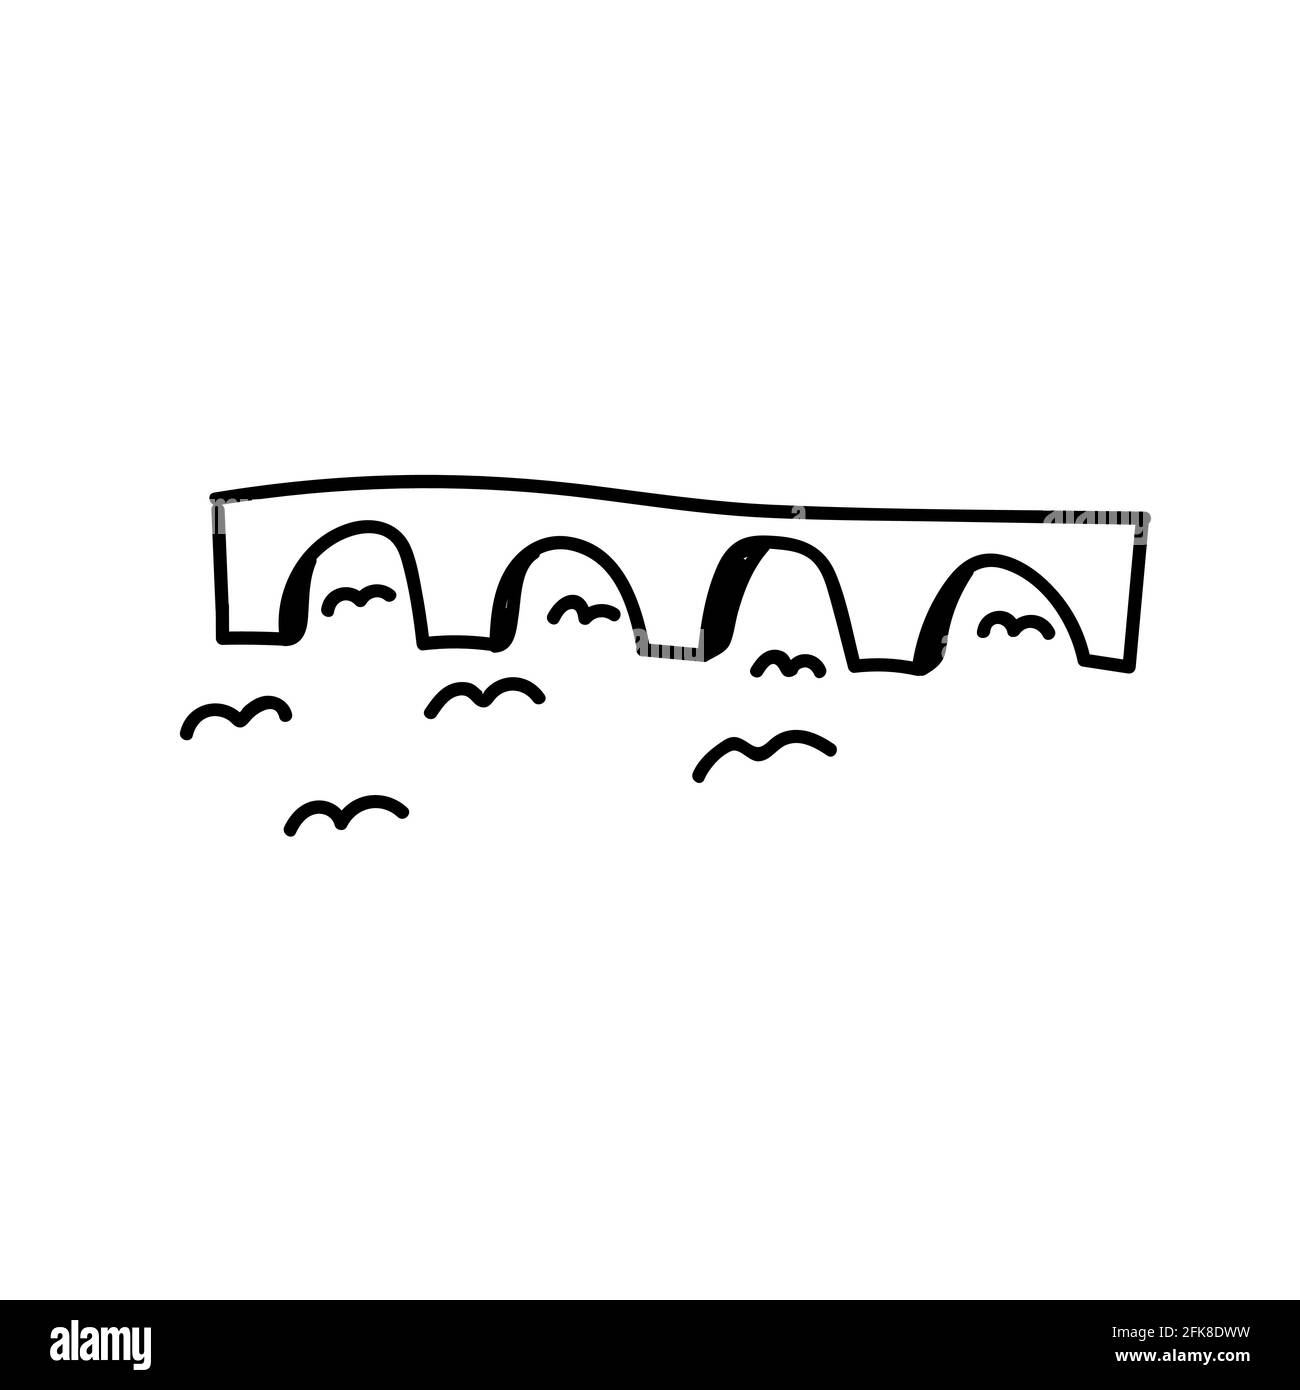 Toulouse bridge. Hand drawn doodle vector illustration isolated on white background. Simple drawings with black color. Stock Vector